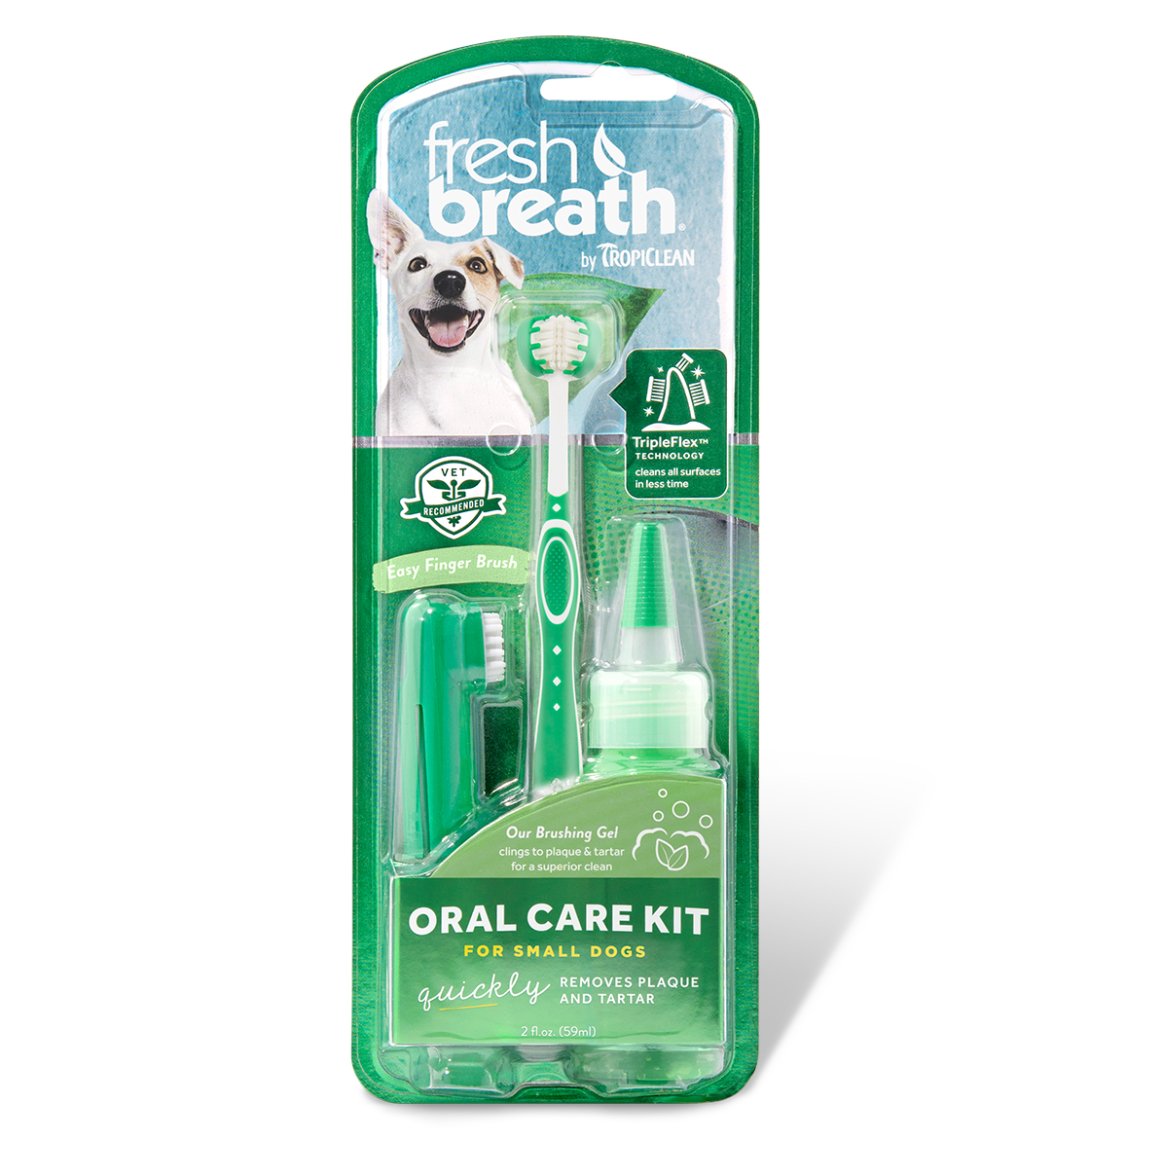  Beaphar Toothbrush and Toothpaste Kit, 100g, 2 Count